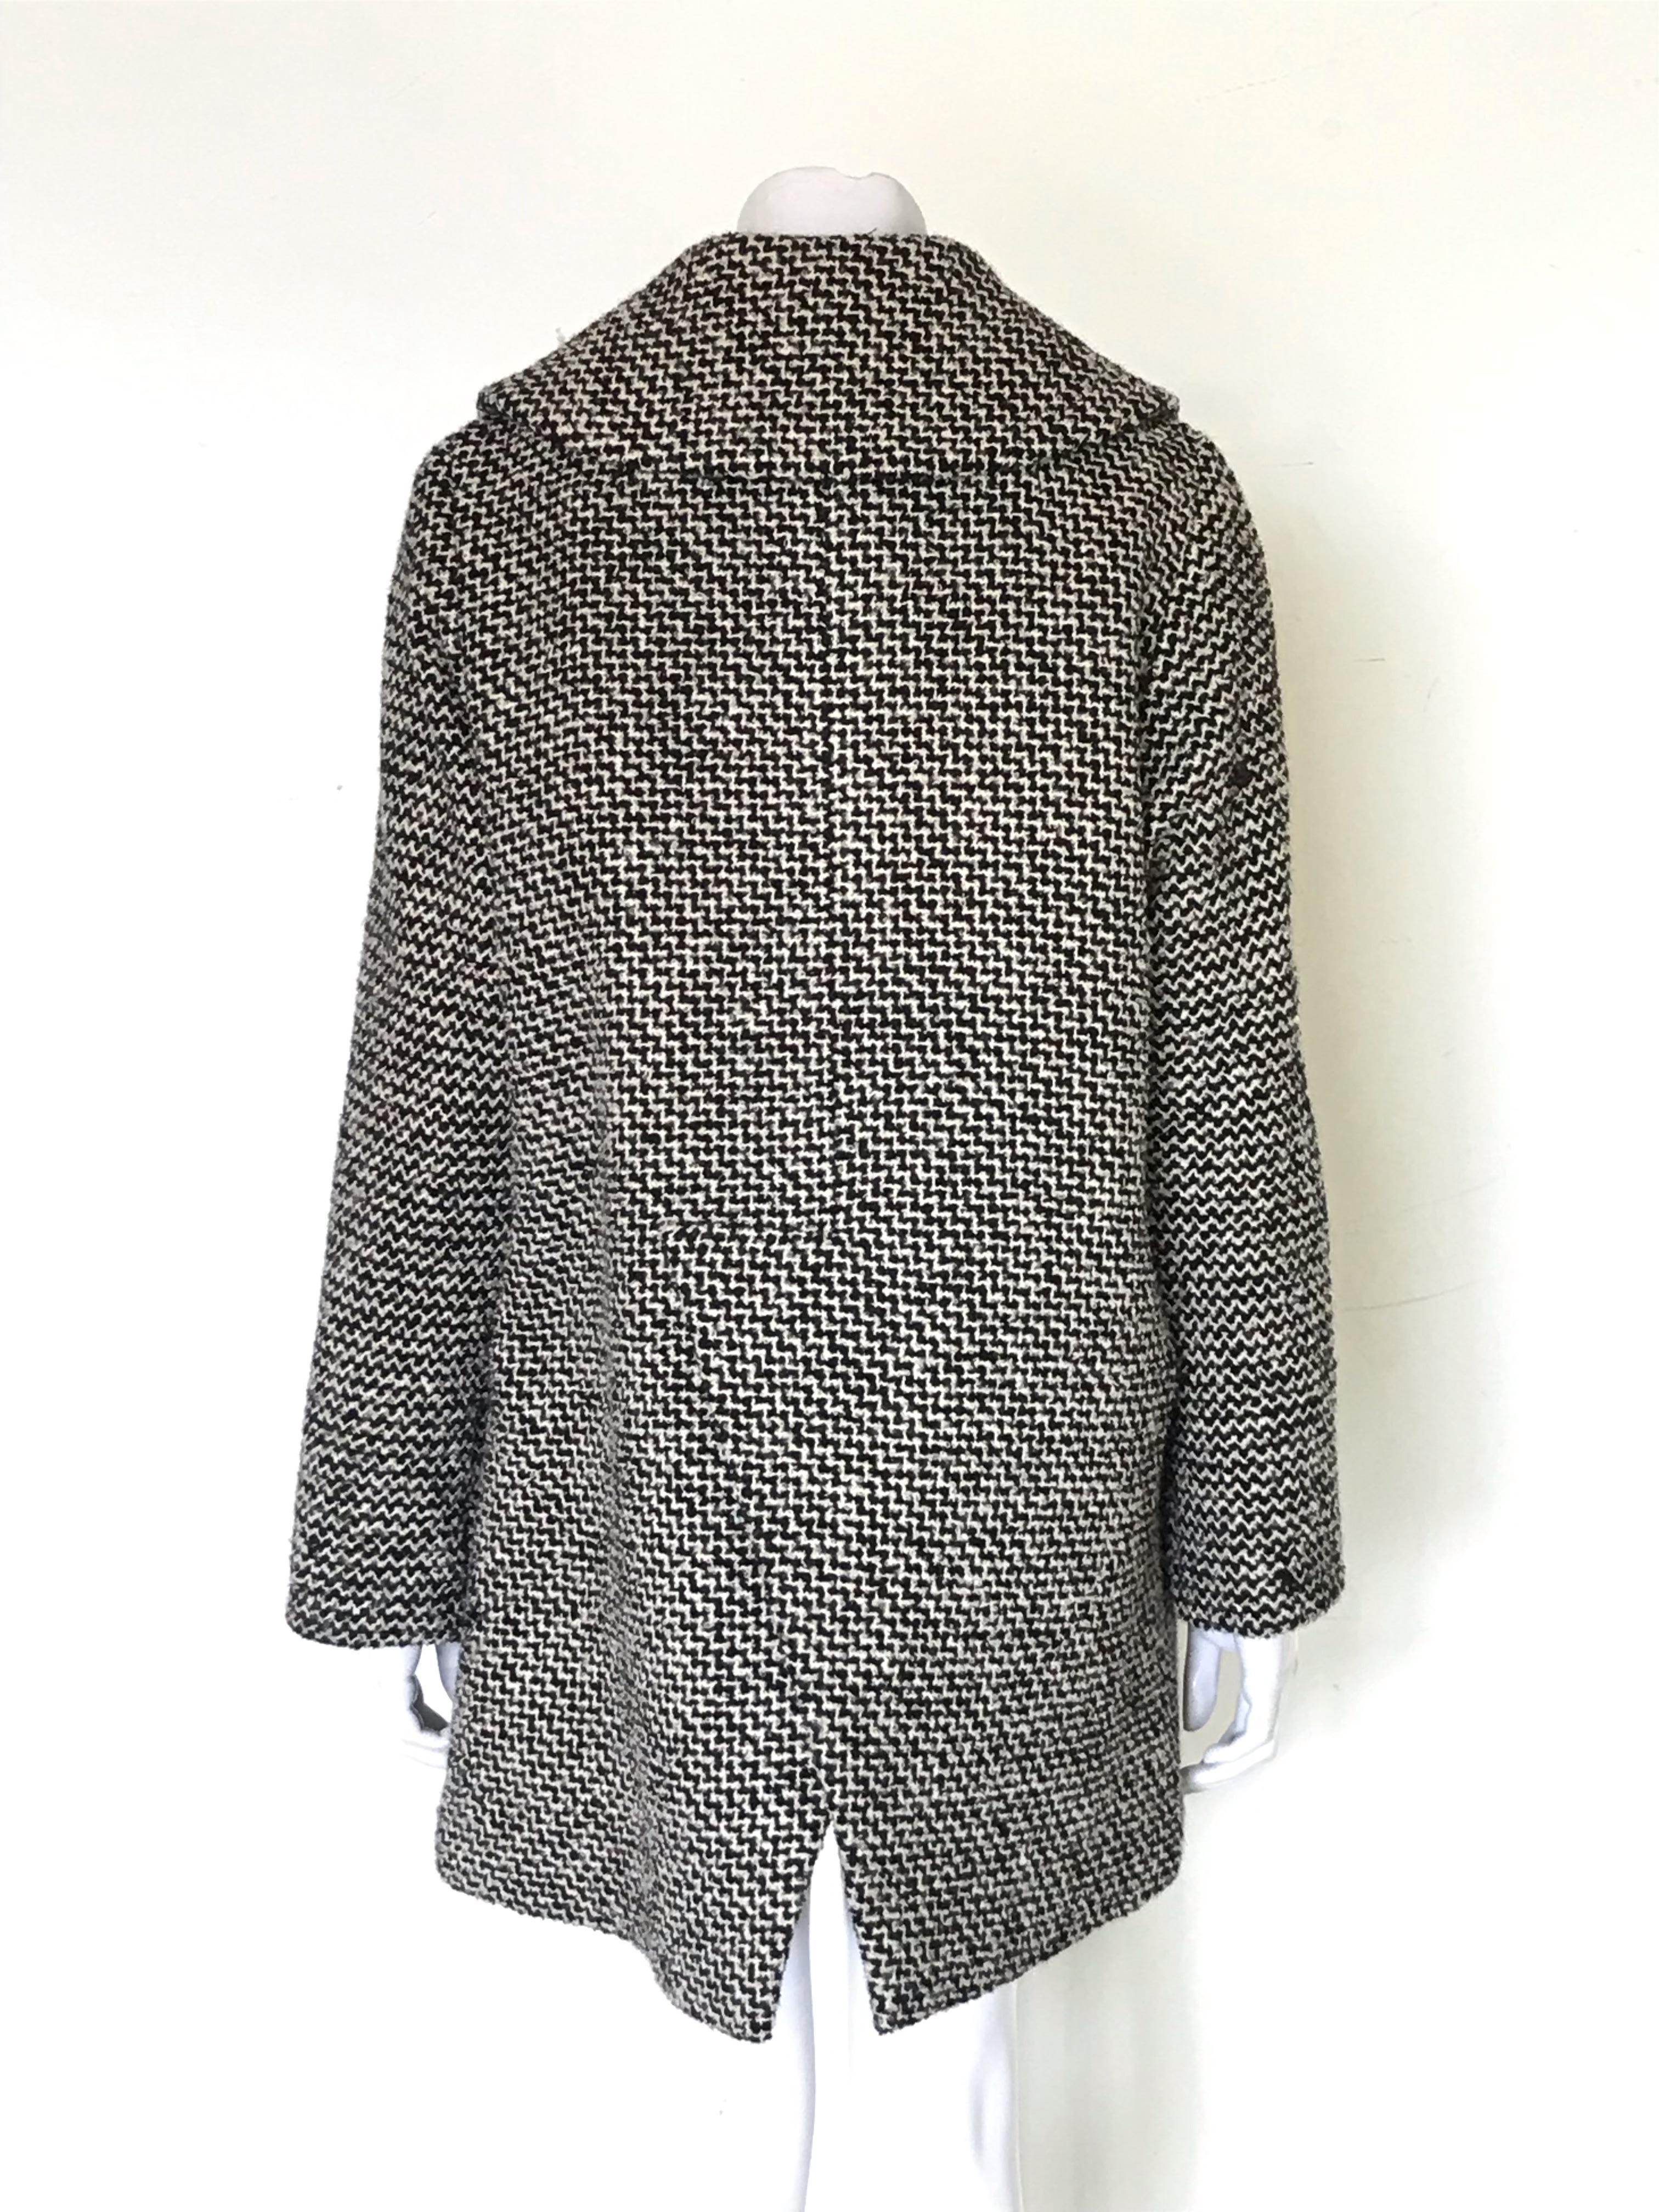 Pauline Trigere 1960s 2-Piece Tweed Coat and Dress Set In Excellent Condition For Sale In Oakland, CA